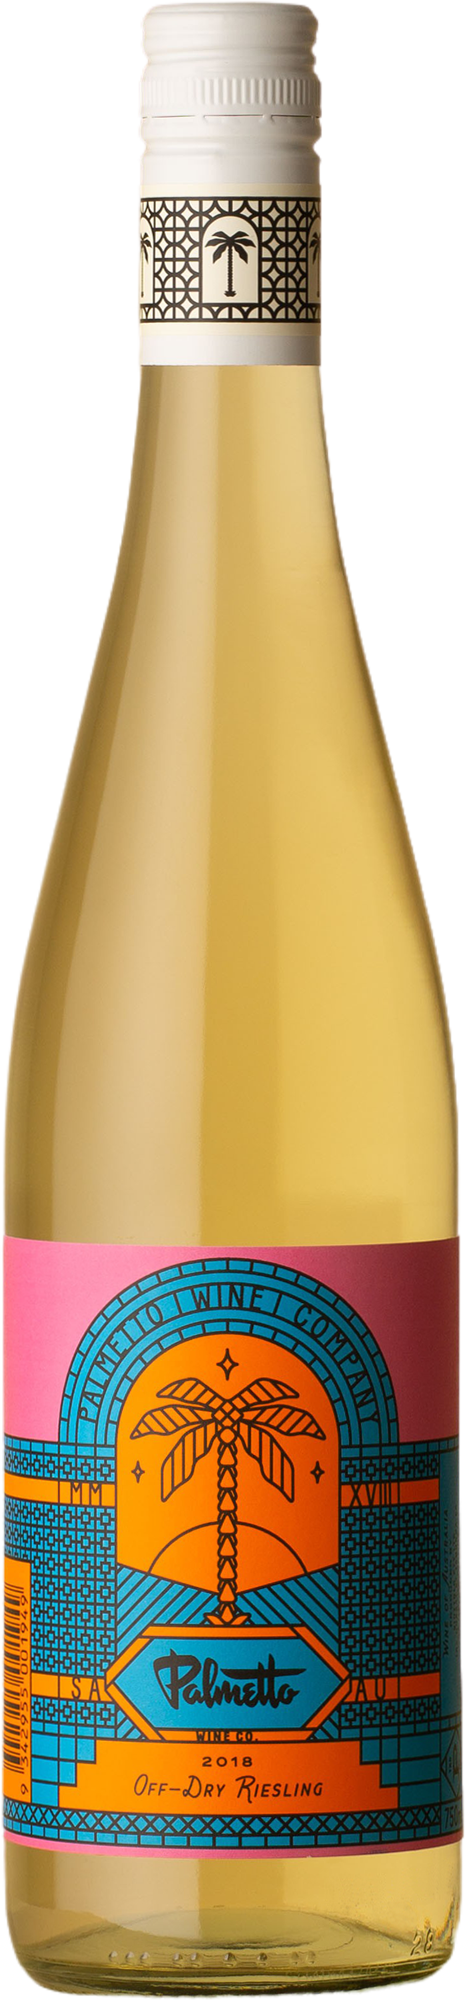 Palmetto - Off-Dry Riesling 2018